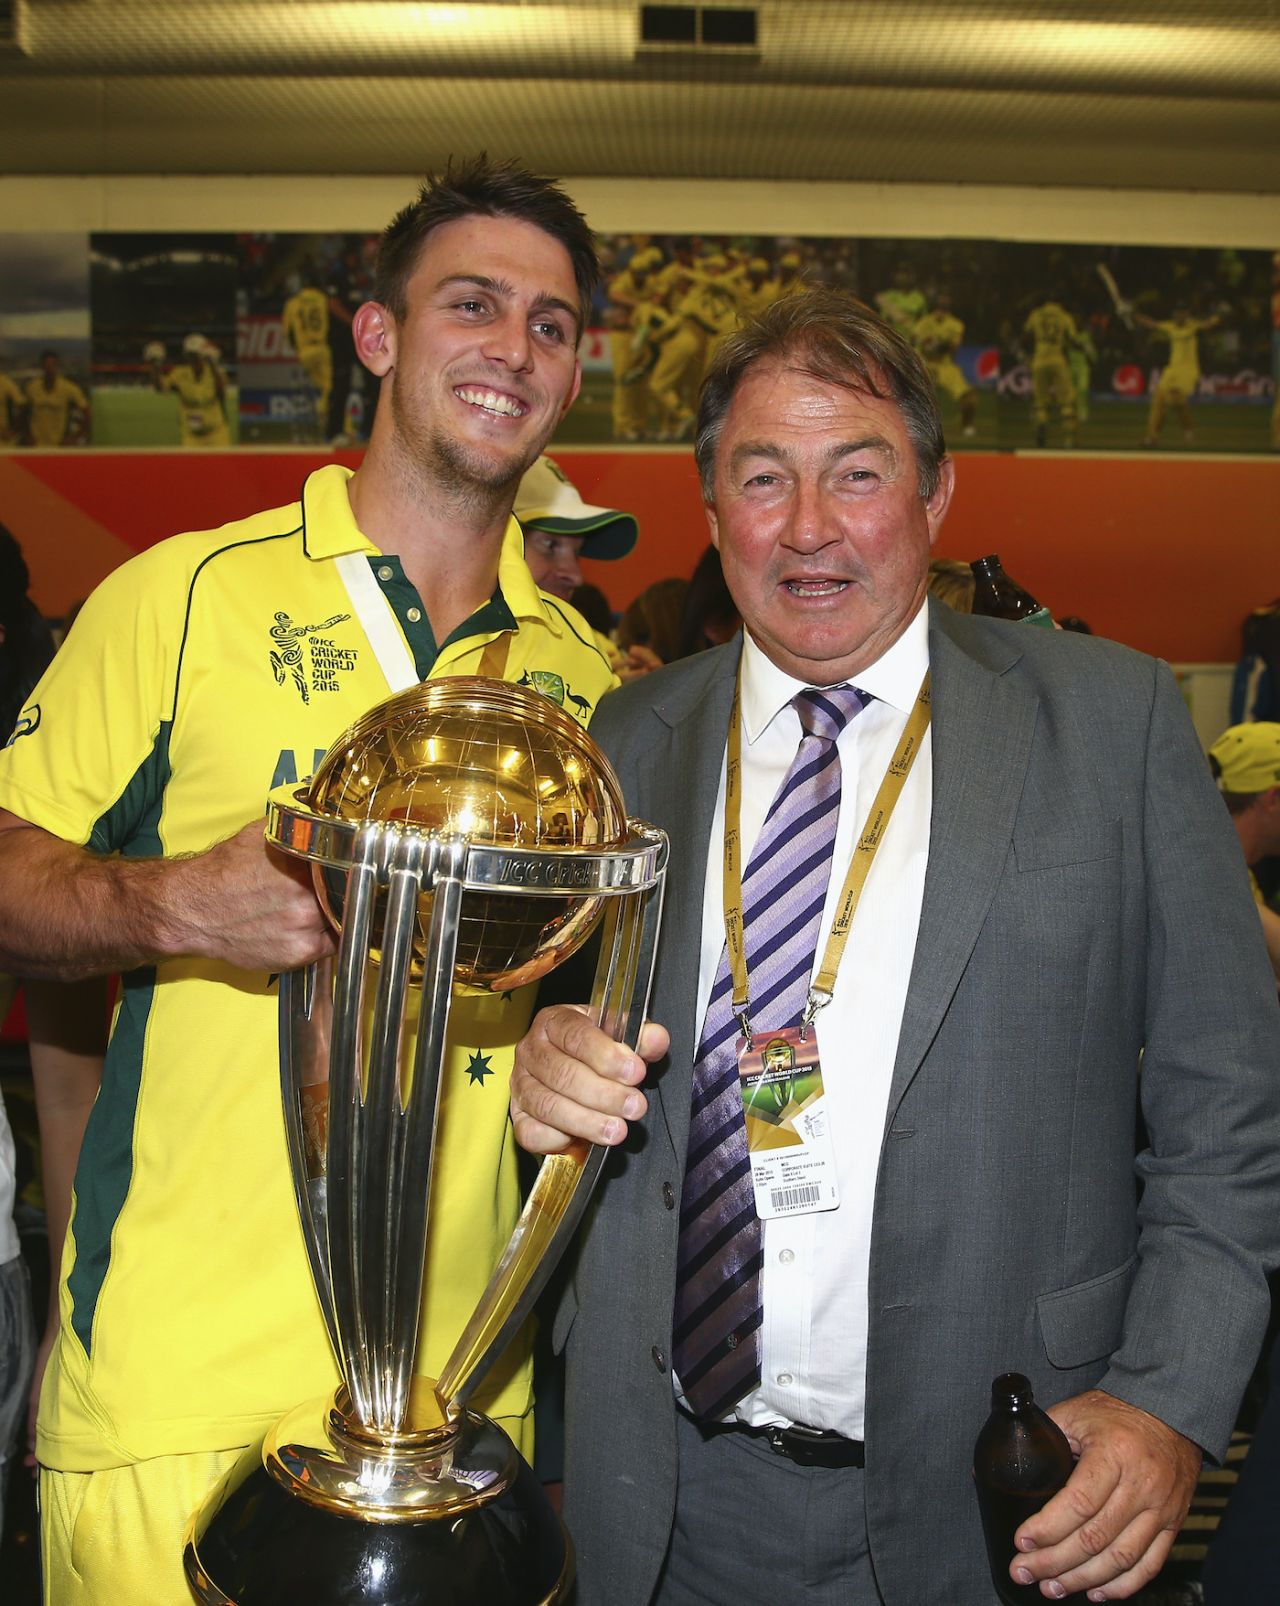 Mitch Marsh celebrates Australia's World Cup win with his father, Geoff Marsh Australia v New Zealand, World Cup 2015, final, Melbourne, March 29, 2015